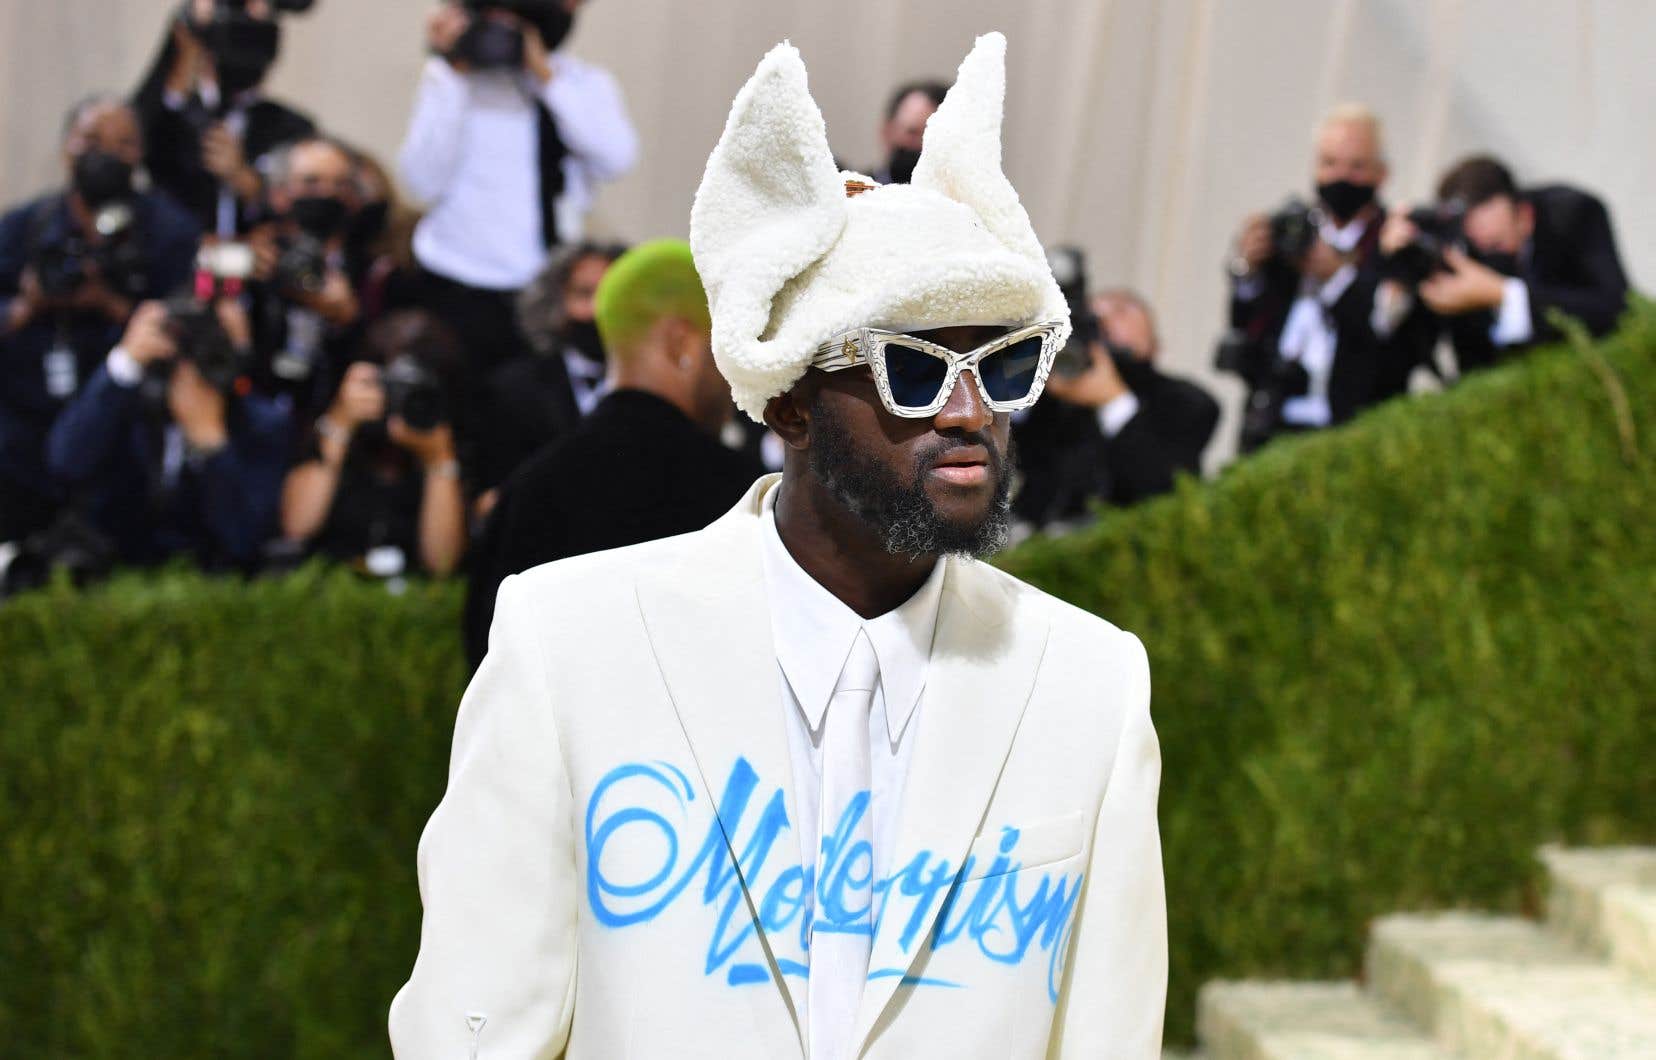 METCHA  Here's a tribute to Virgil Abloh's visionary legacy.